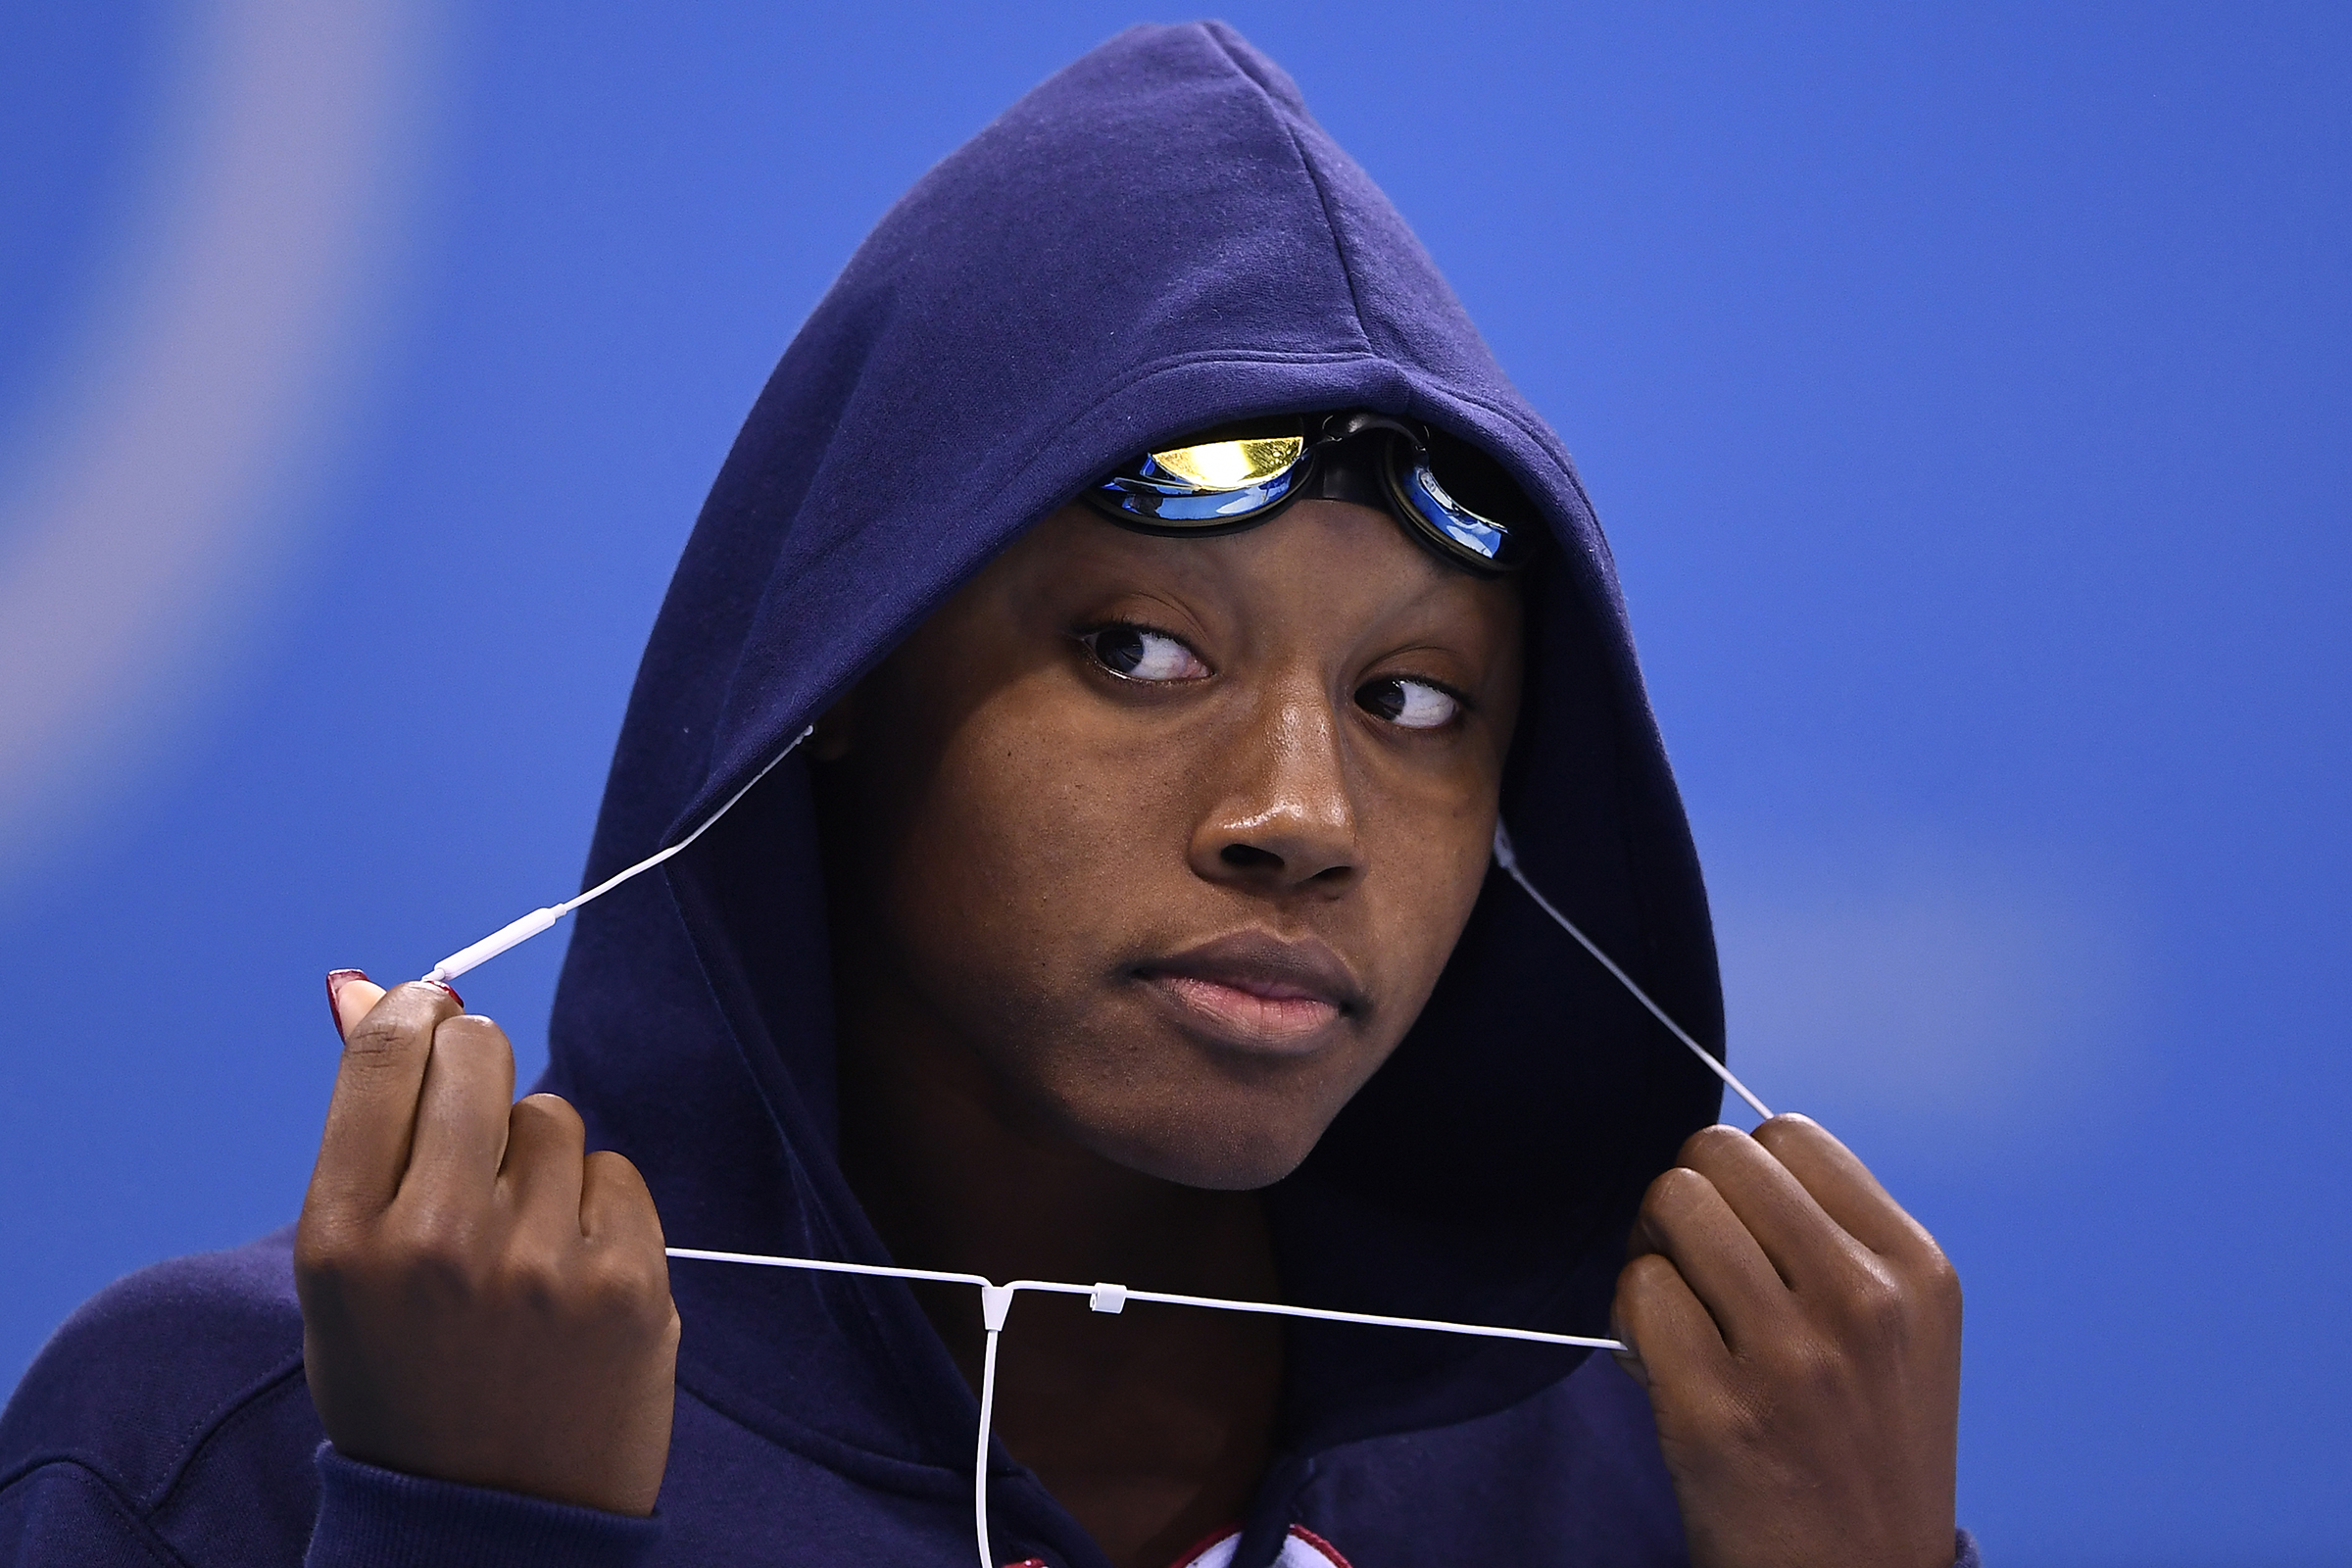 Simone Manuel takes part in the Women's 50m Freestyle Semifinal during the swimming event at the Rio 2016 Olympic Games at the Olympic Aquatics Stadium in Rio de Janeiro on August 12, 2016.   / AFP PHOTO / GABRIEL BOUYS